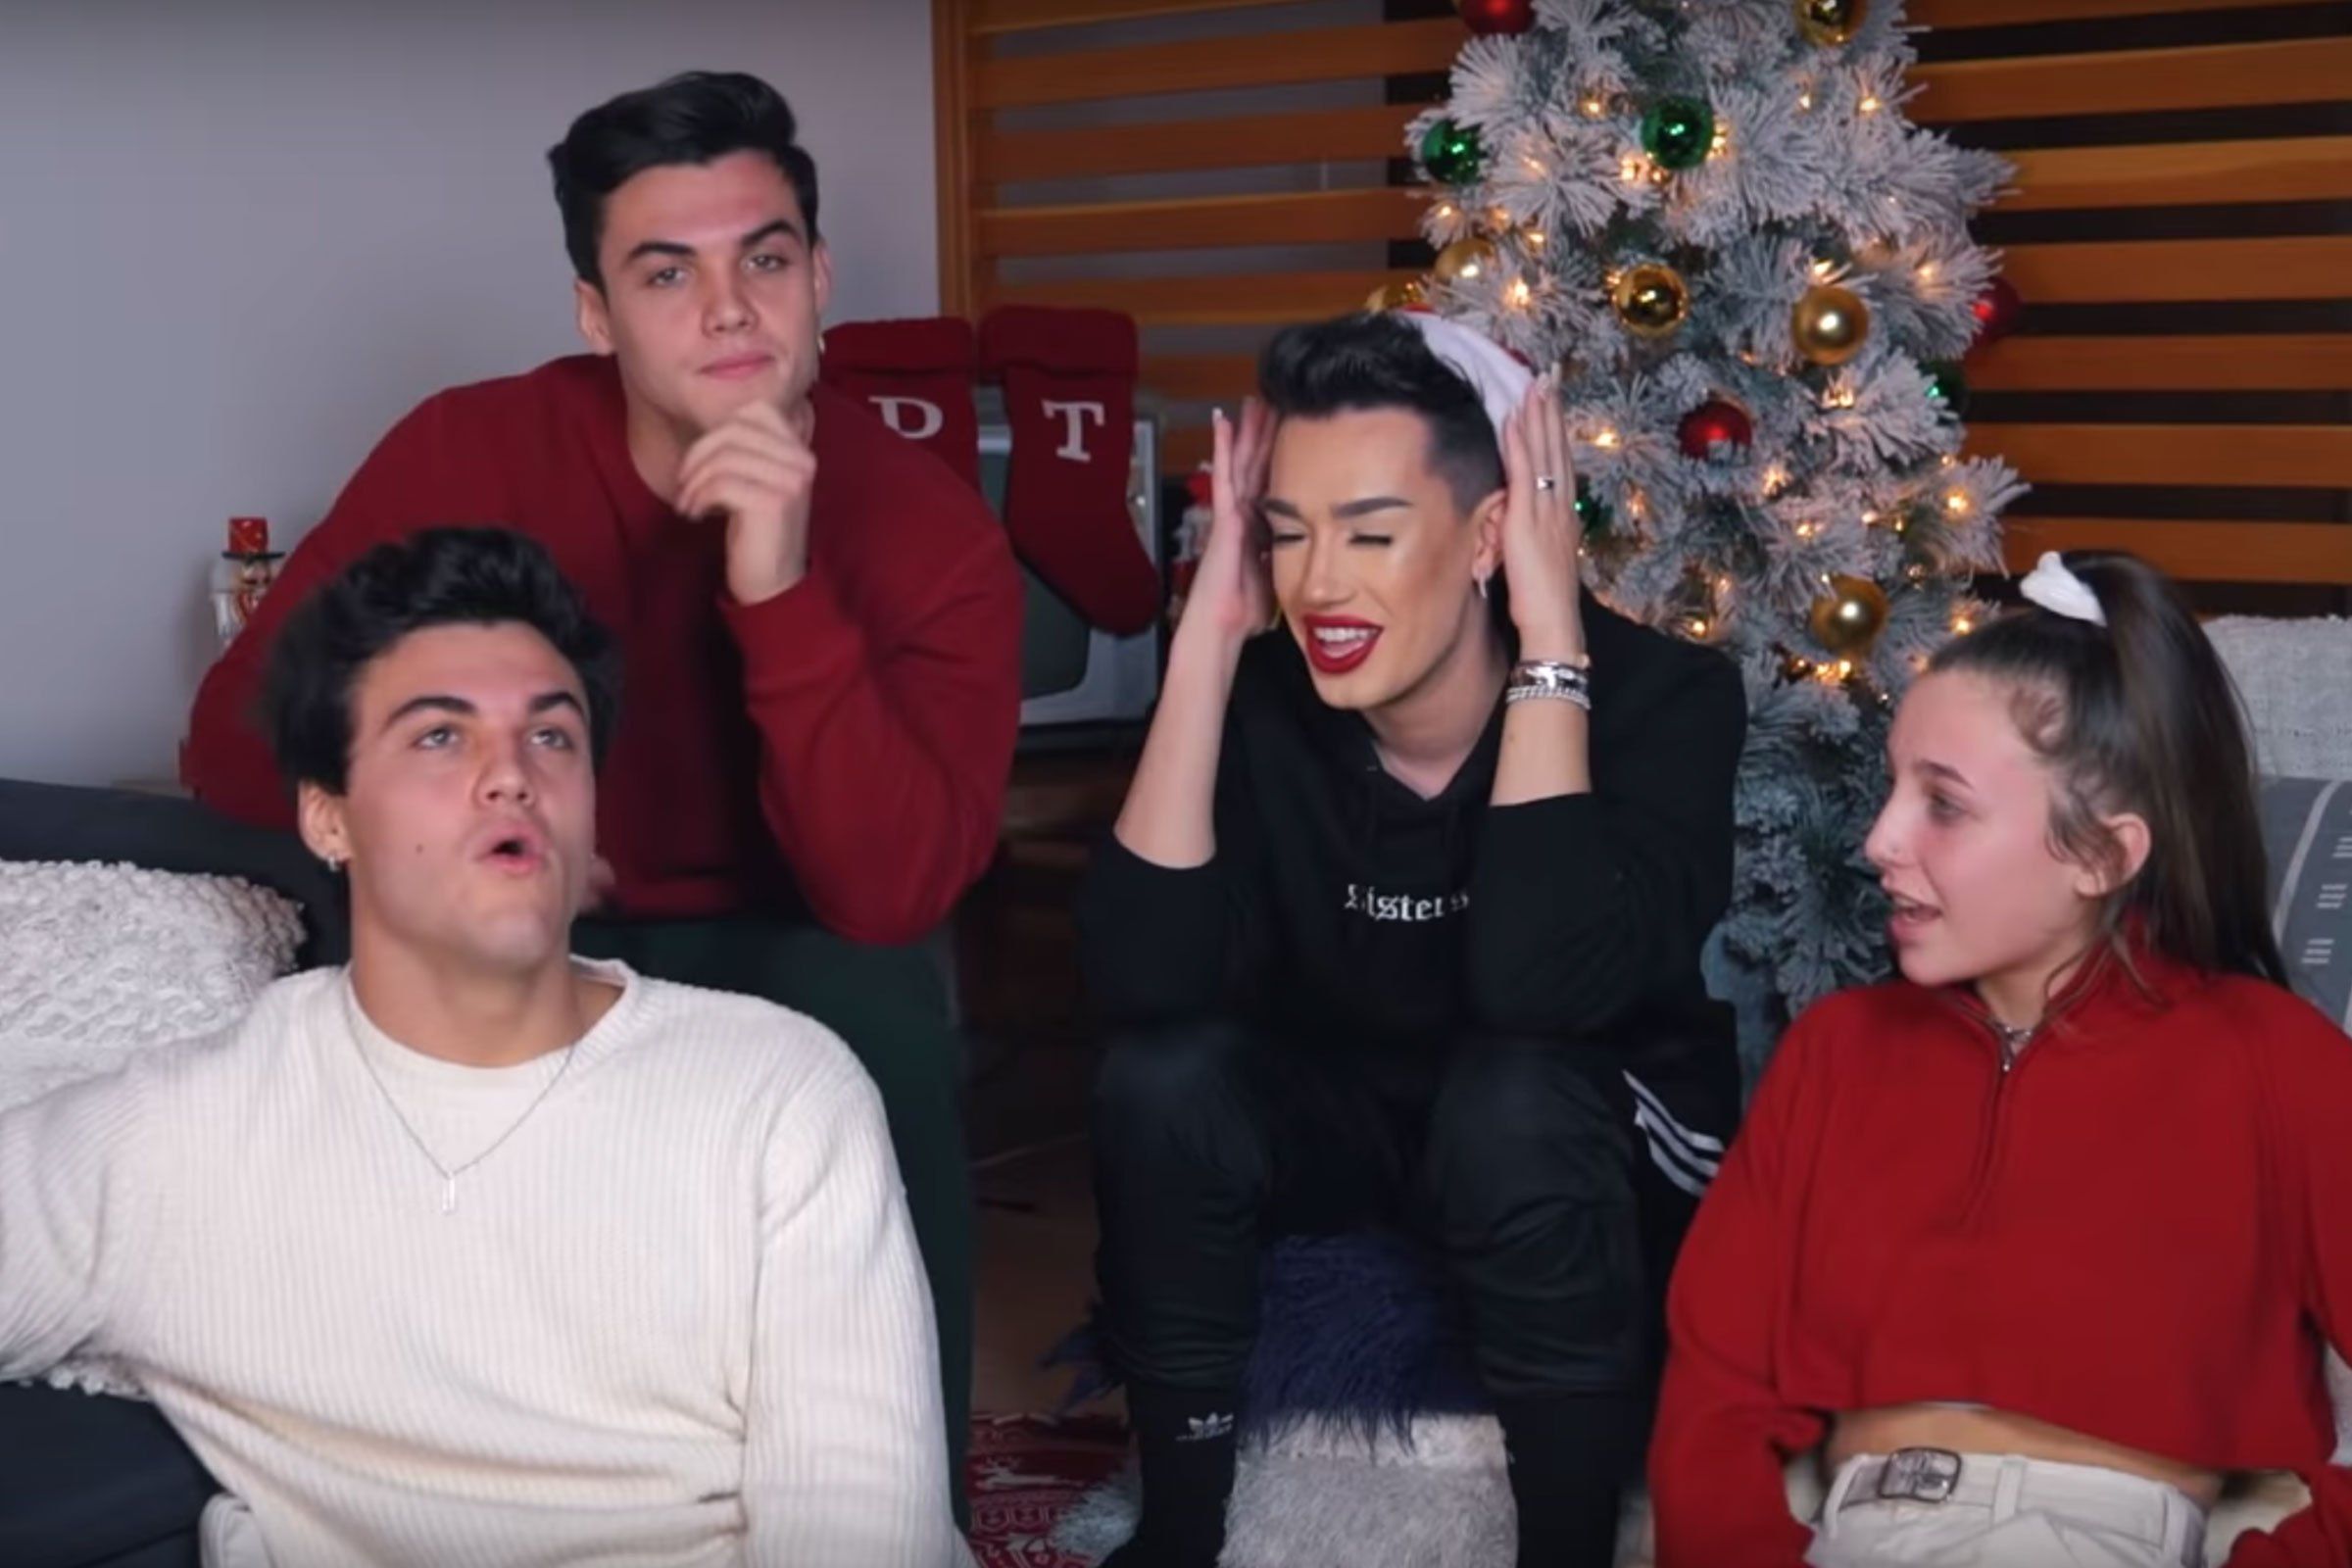 See What Presents The Sister Squad Got Each Other For Christmas